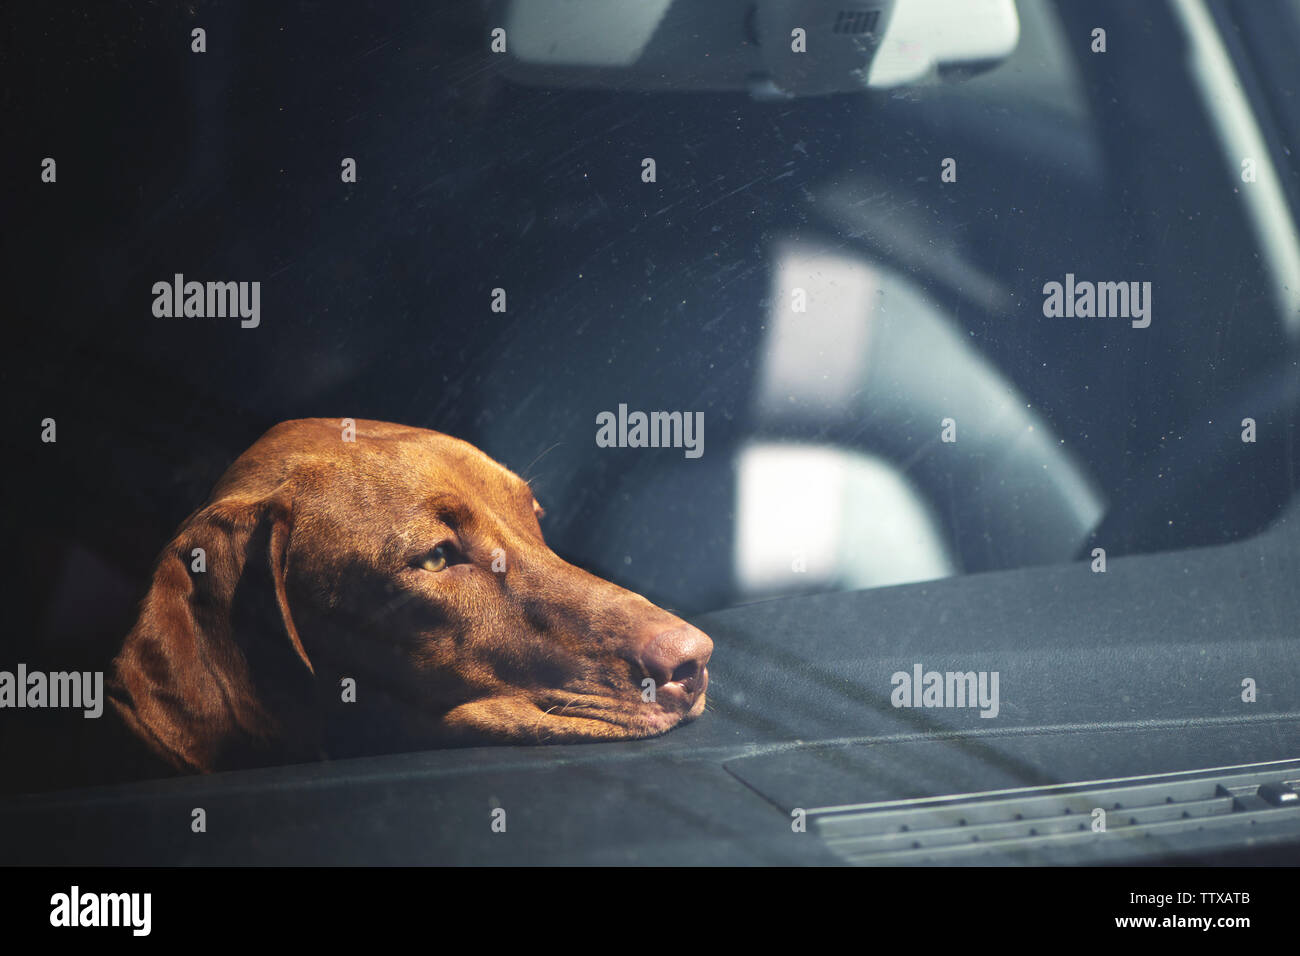 Dreary dog left alone in locked car. Abandoned animal concept. Stock Photo